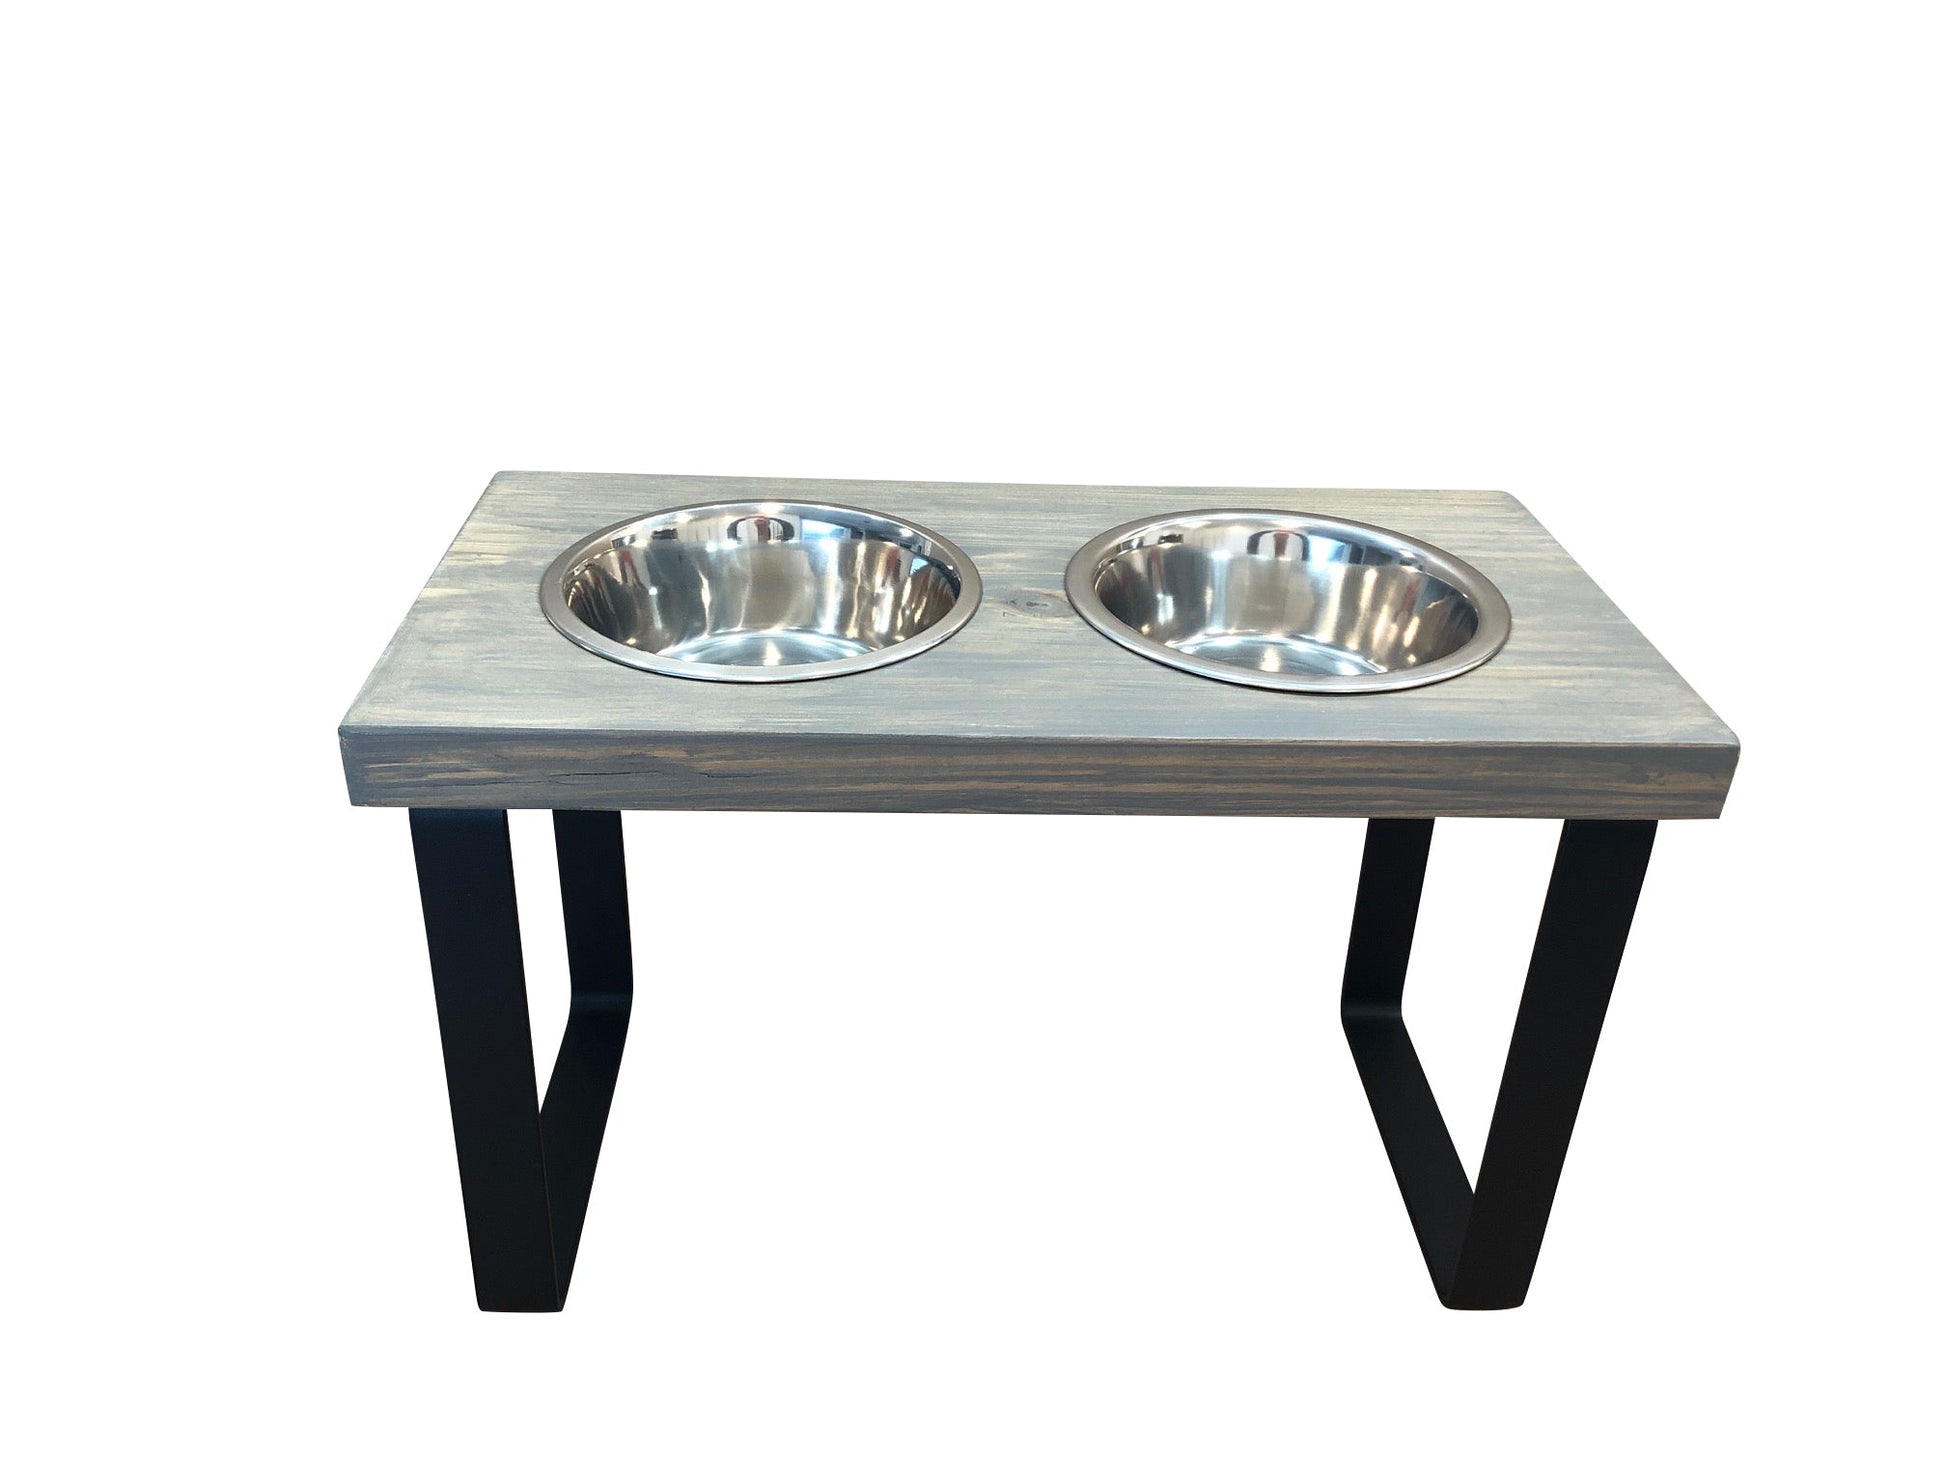 Stainless Steel Elevated Dog Bowl with Stand